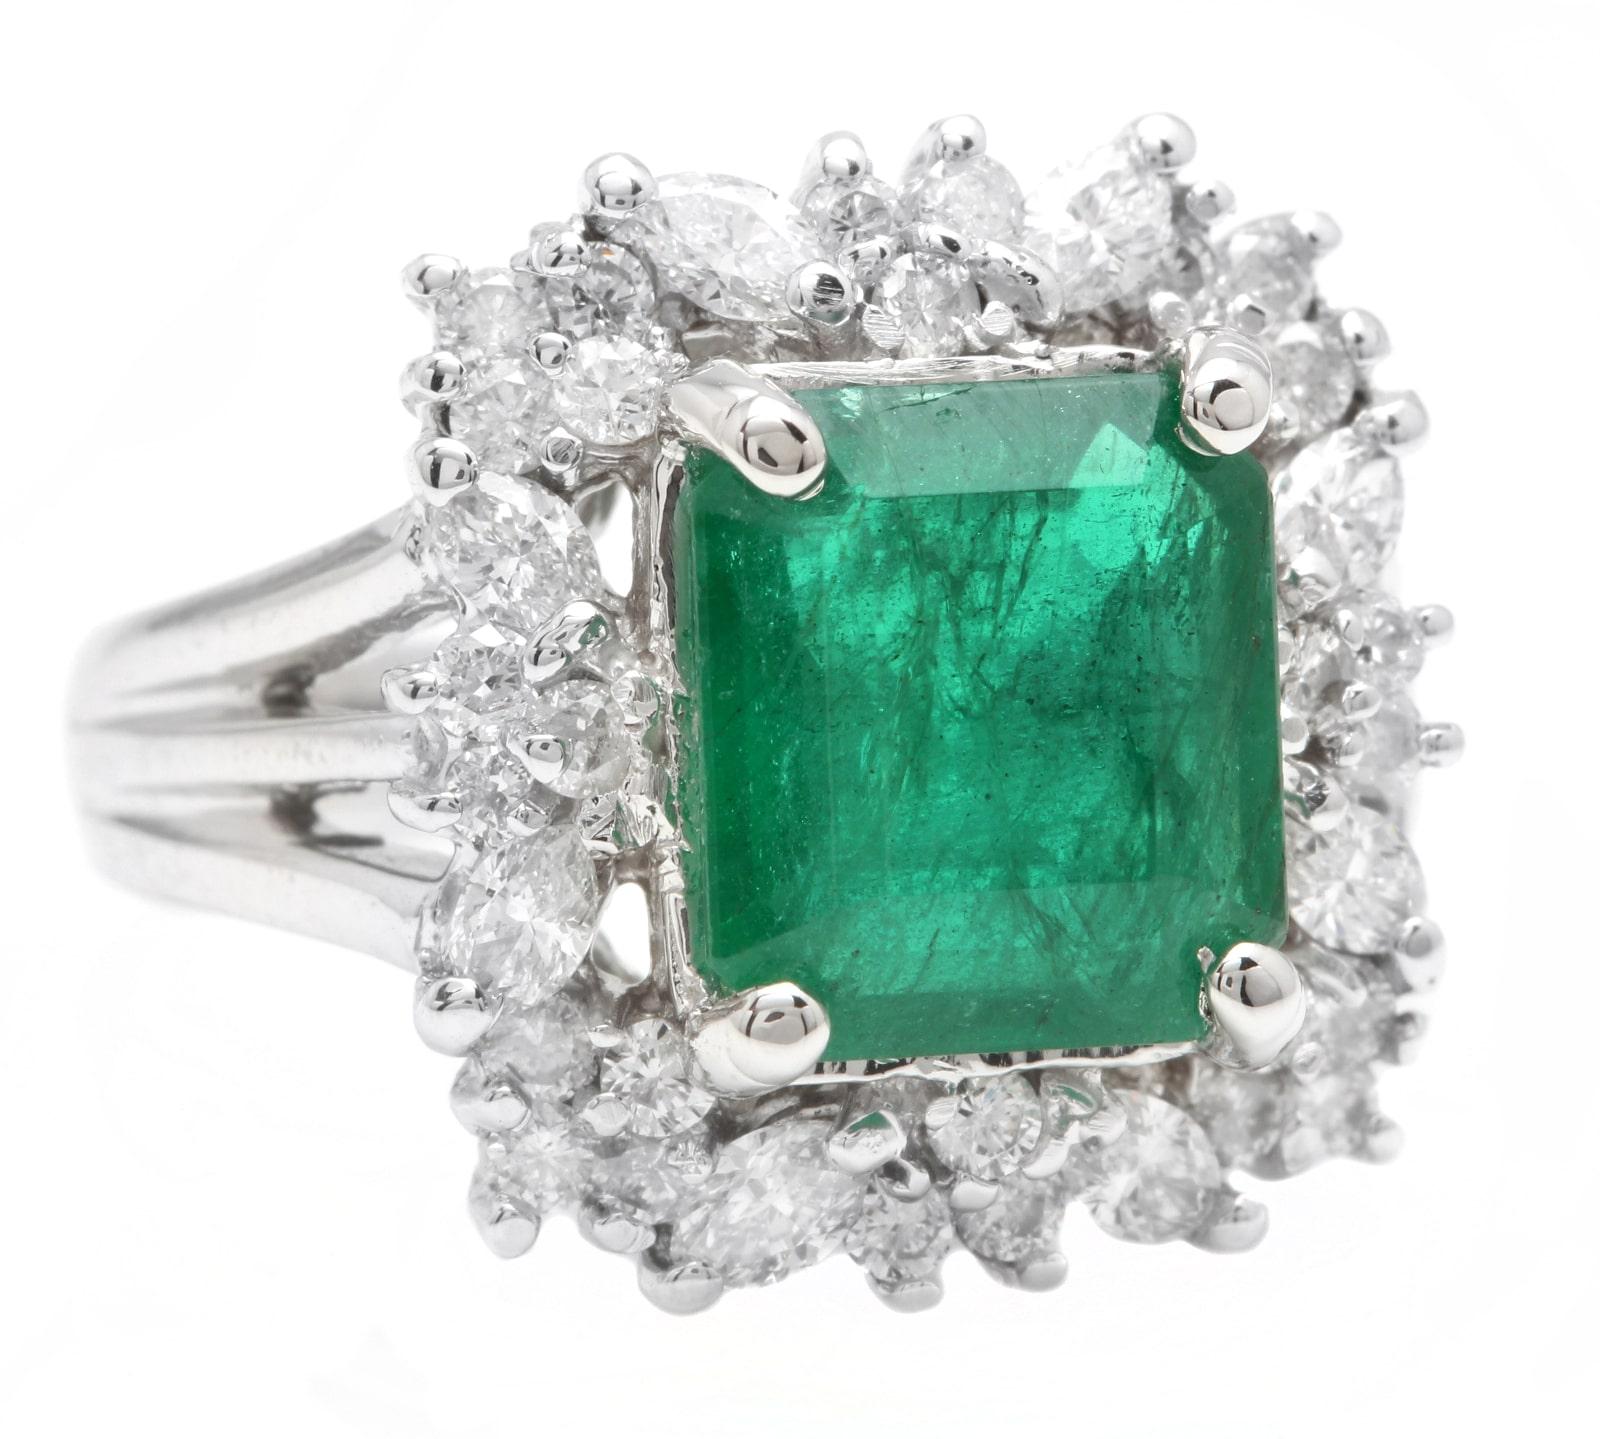 5.65 Carats Natural Emerald and Diamond 14K Solid White Gold Ring

Suggested Replacement Value: US$7000.00

Center Emerald Cut Emerald Weight is: Approx. 4.50Ct (transparent)

Emerald Treatment: Oiling

Center Emerald Measures: Approx. 12 x